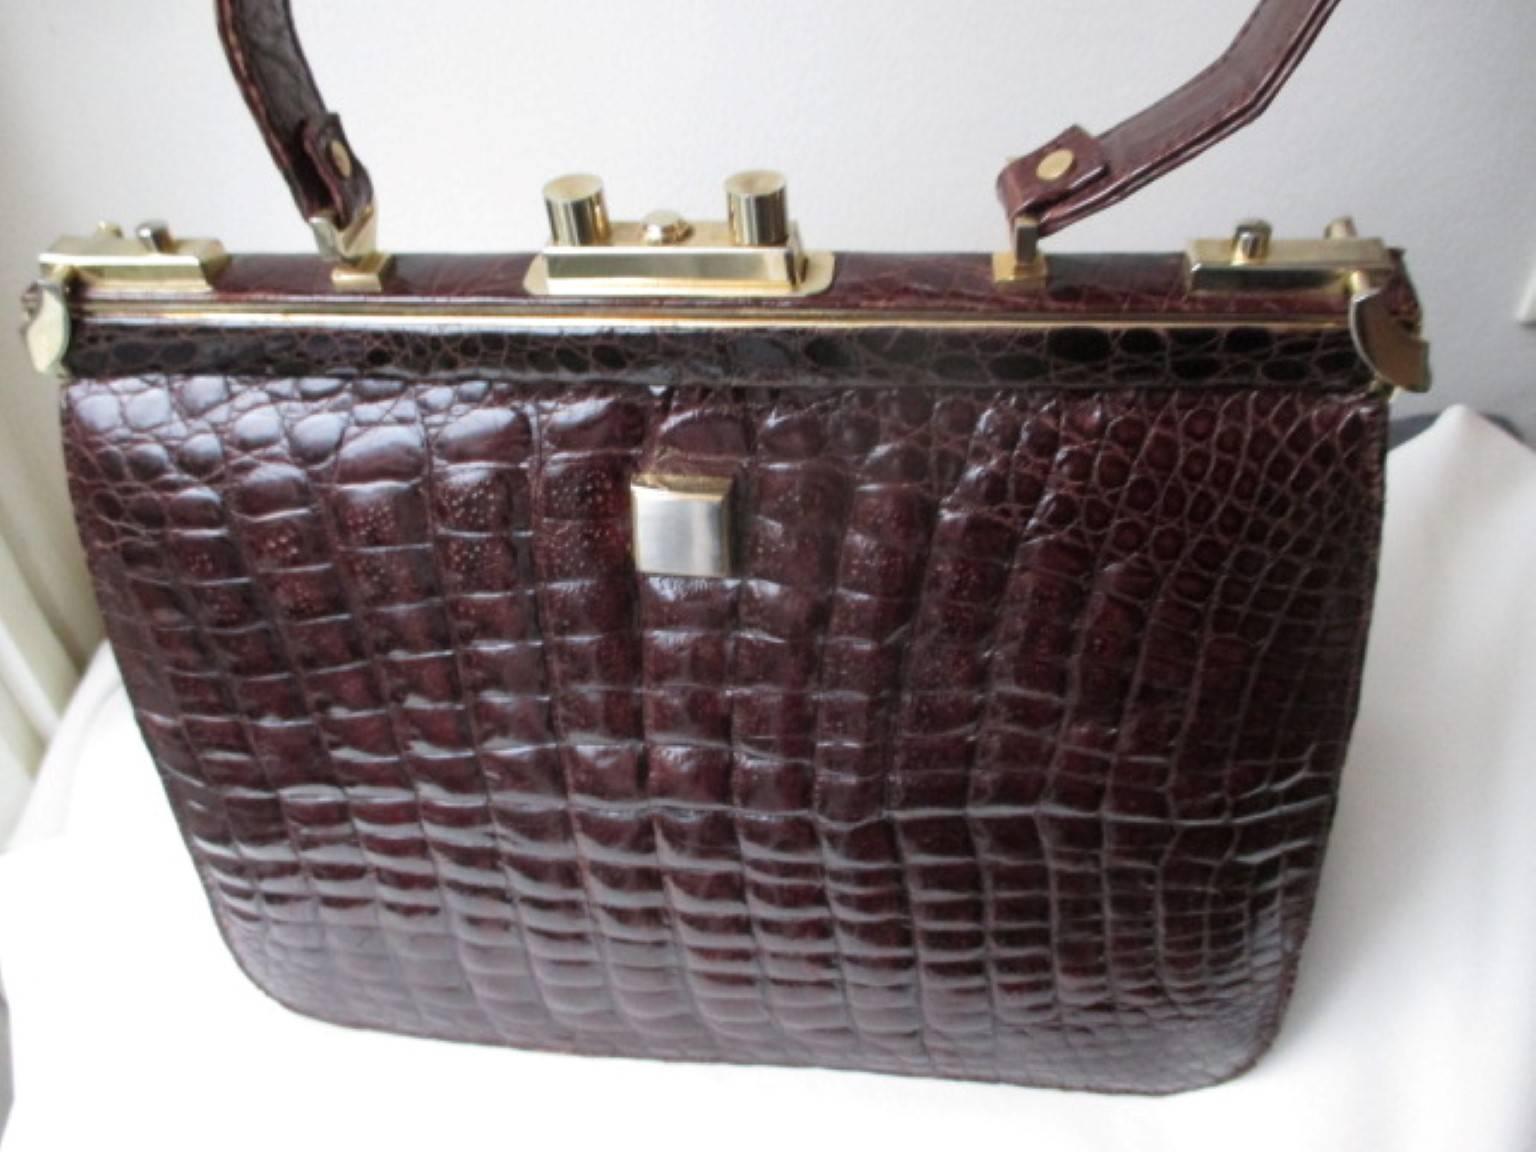 This vintage ladies bag is made from crocodile around the 60's, has a great glossy skin and the color is burgundy brown.
Its closing with 2 side clips and a lock in the middle.
The interior is made from suede leather and has 3 pockets,  one with a